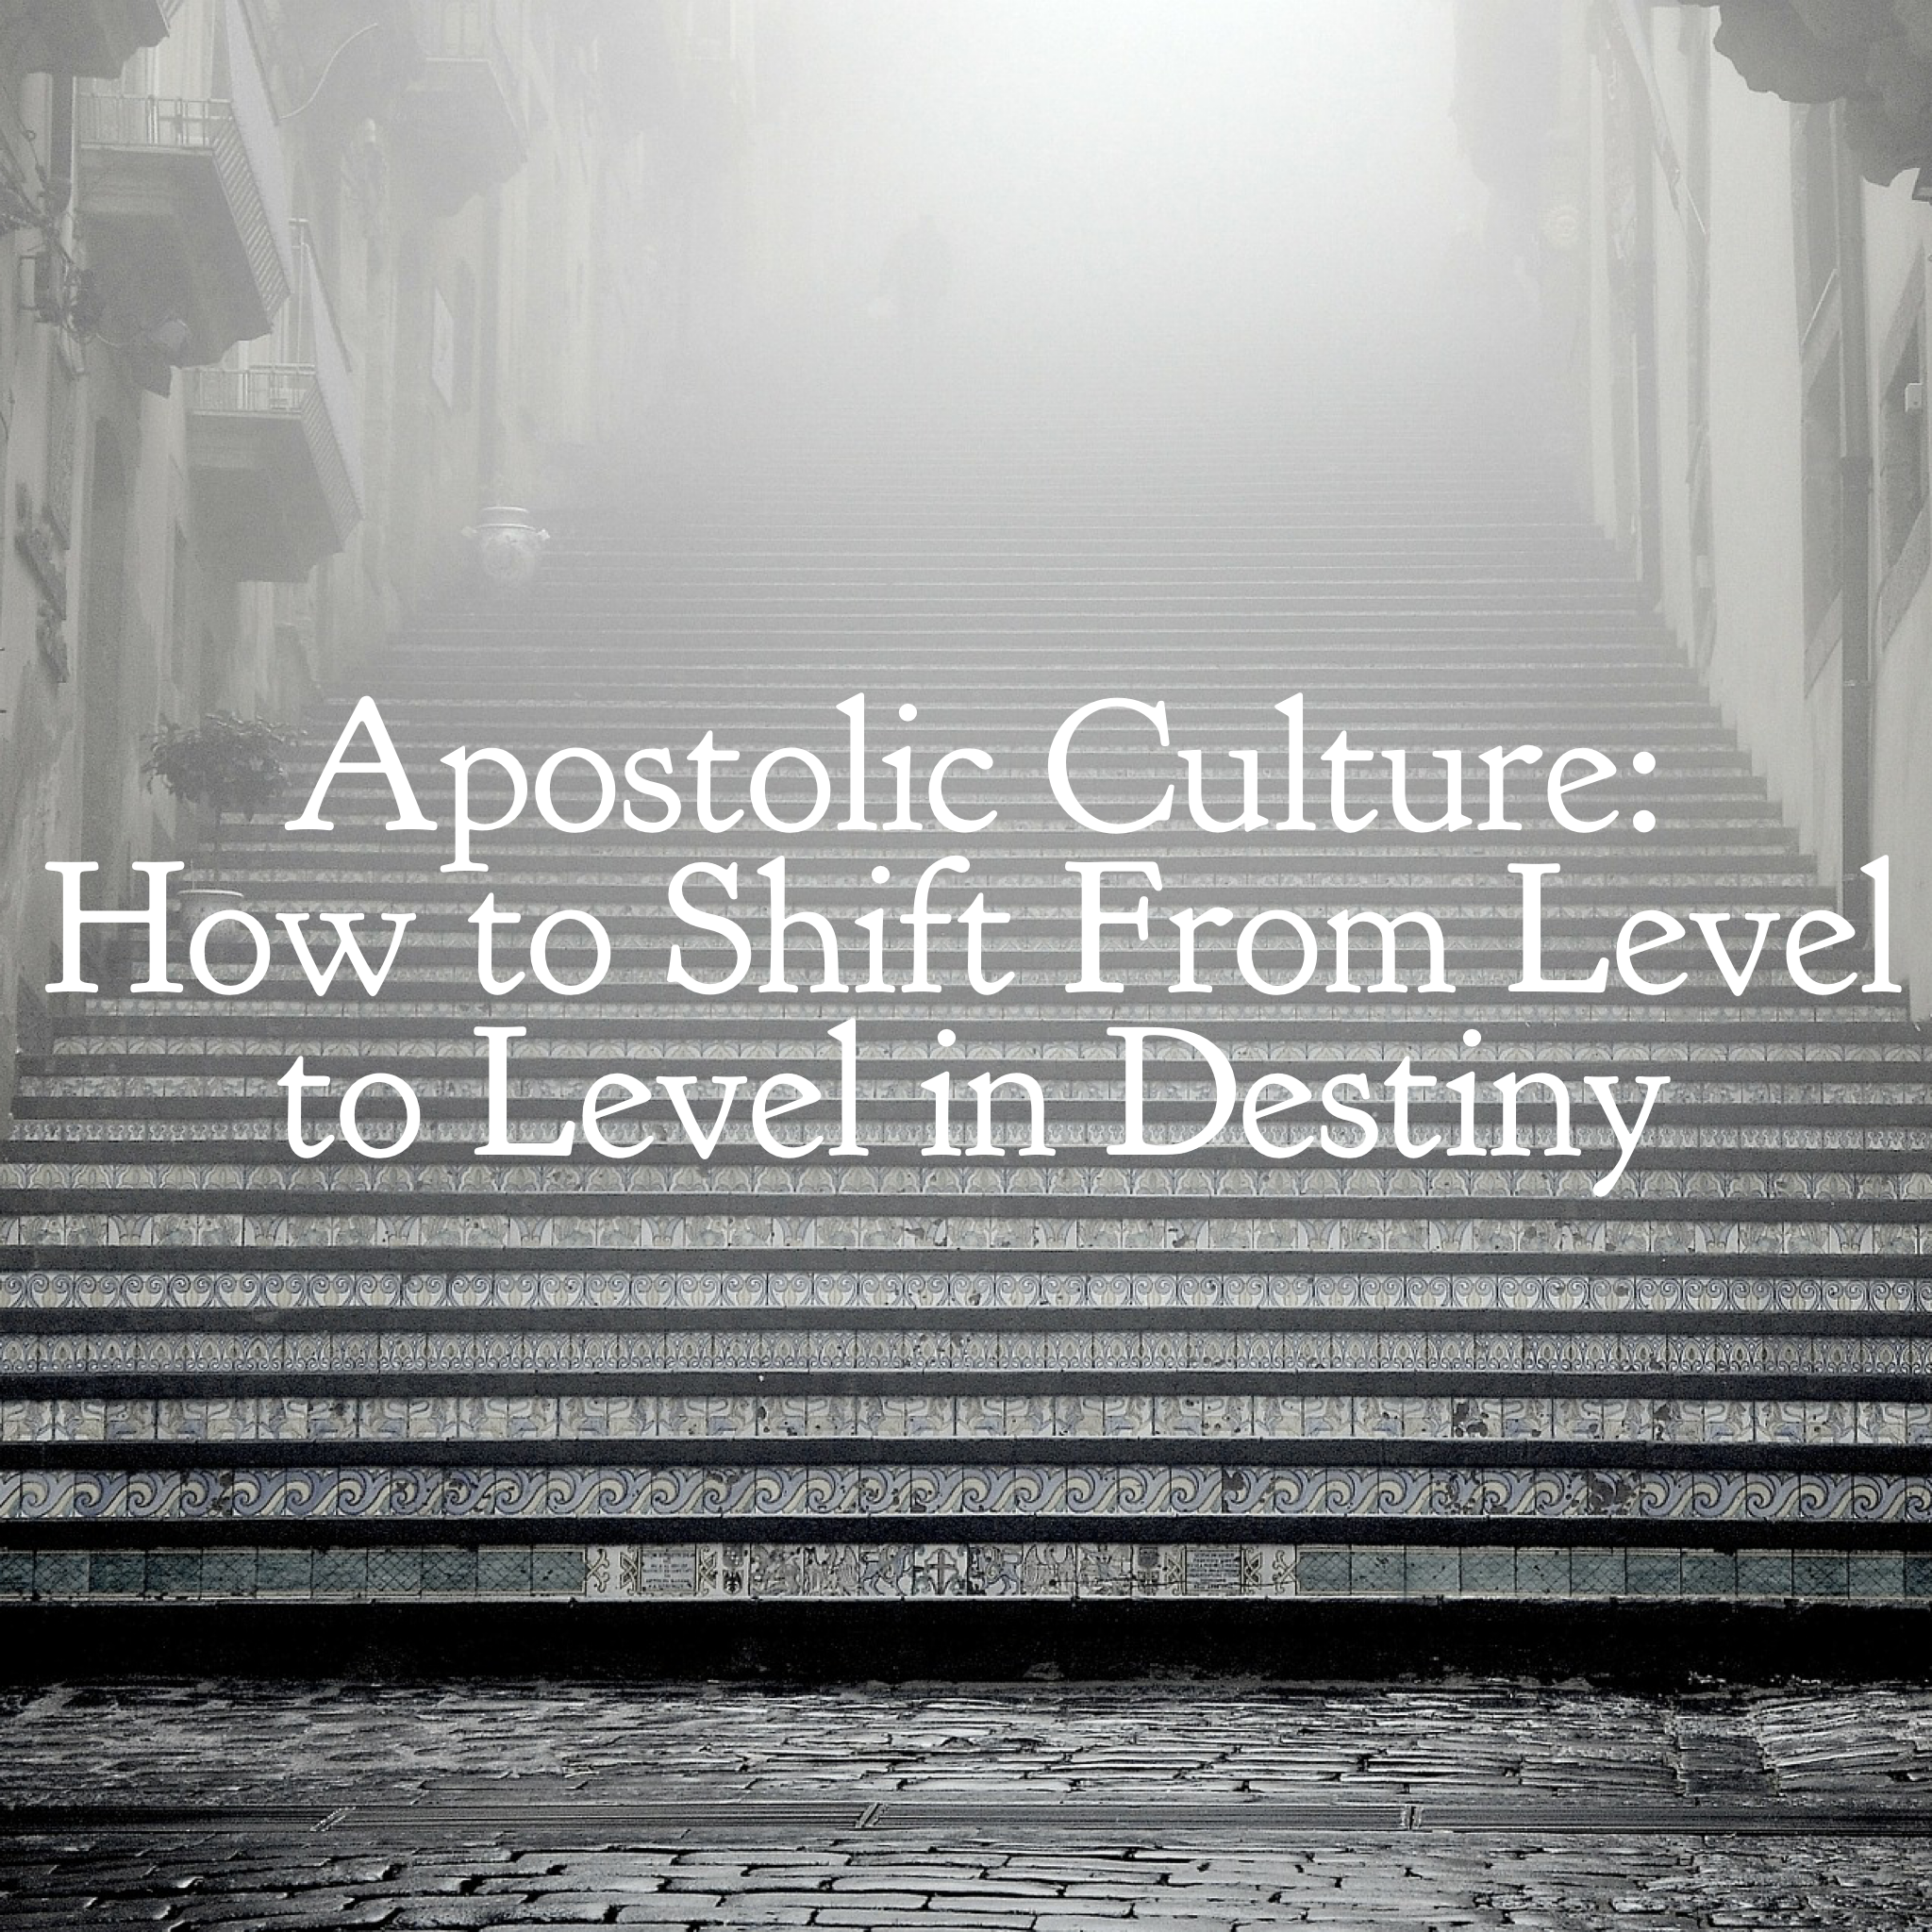 Apostolic Culture: How to Shift From Level to Level in Destiny - 4/2/19